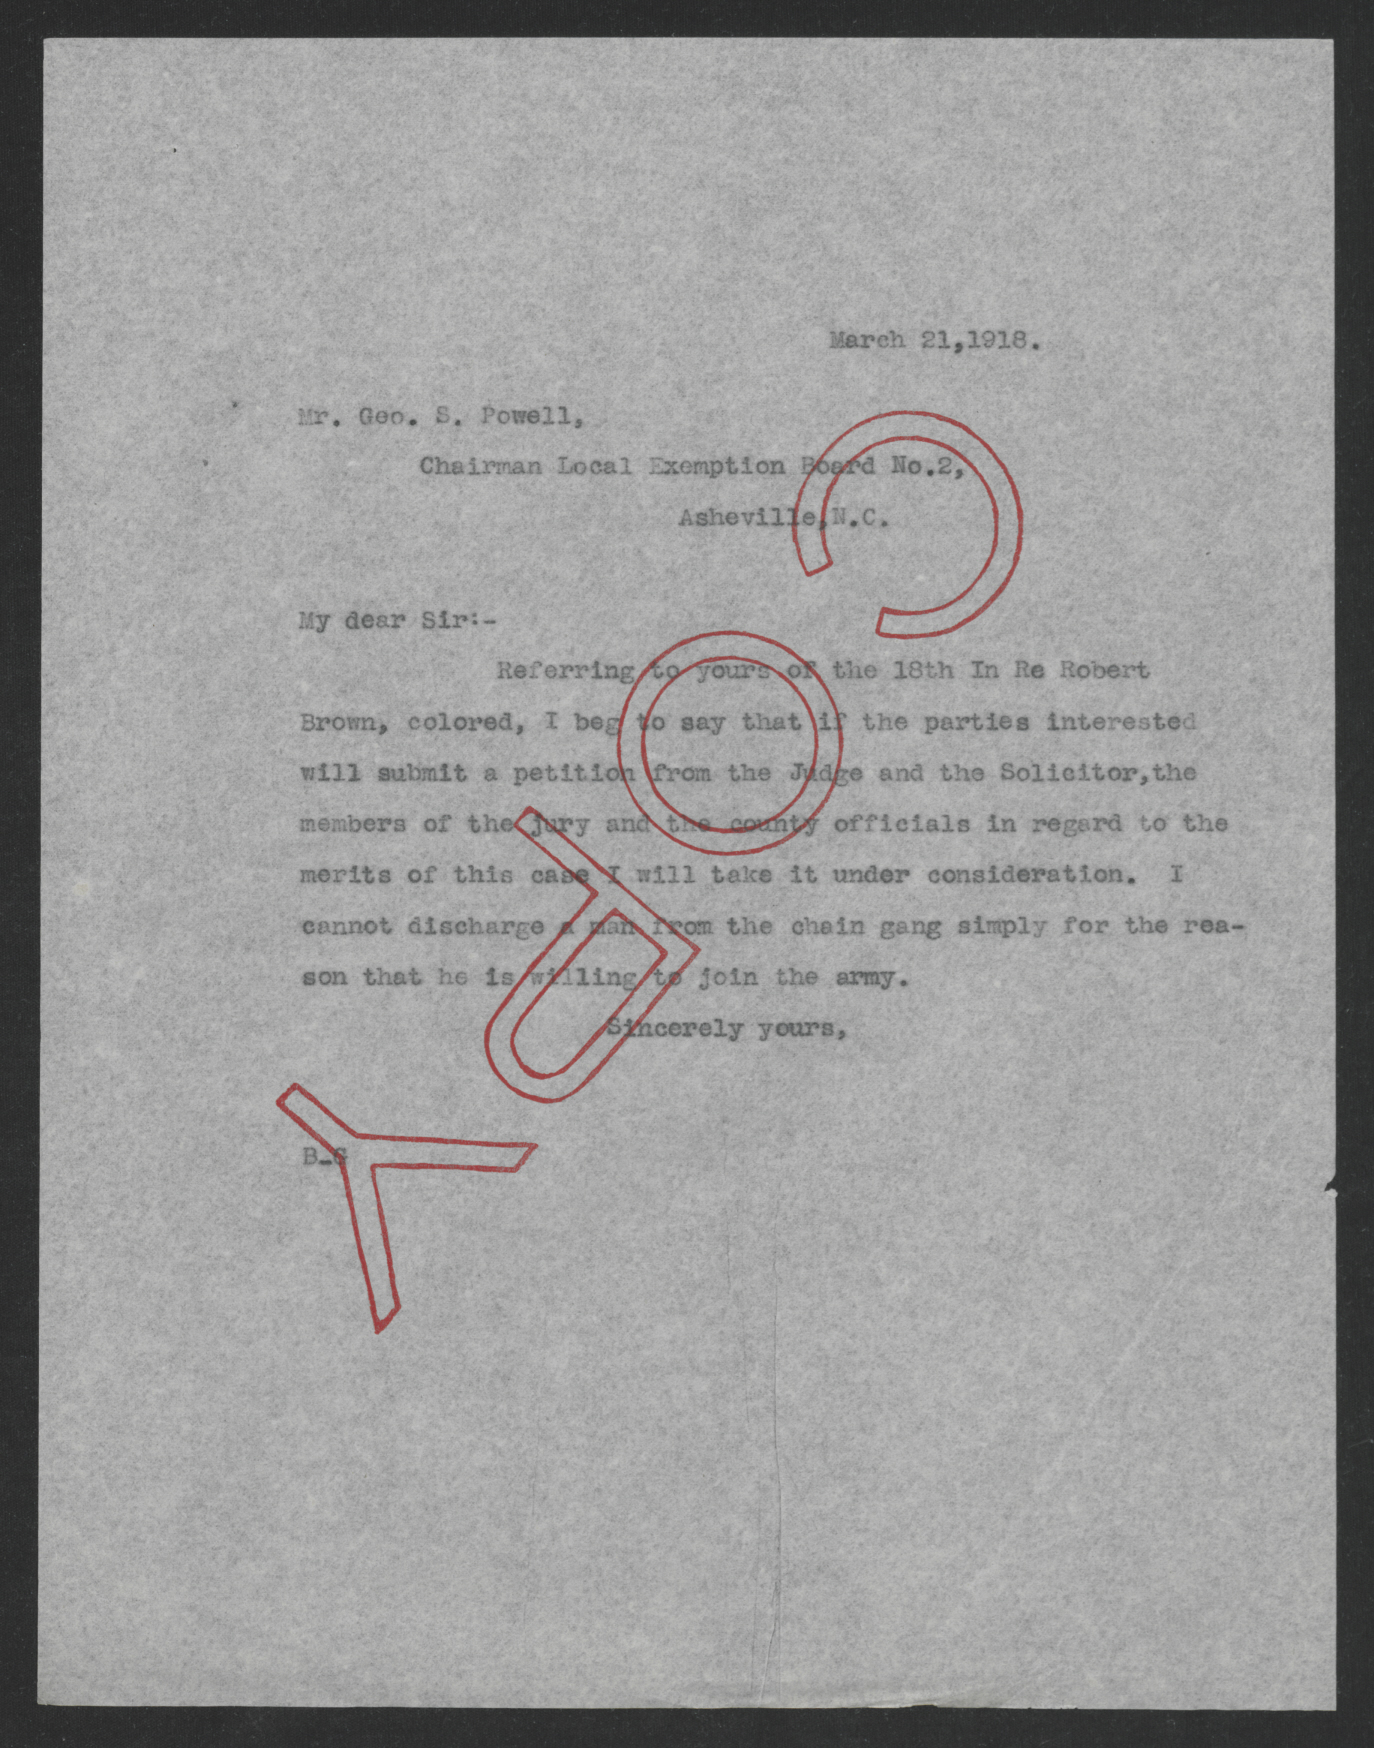 Letter from Thomas W. Bickett to George S. Powell, March 21, 1918